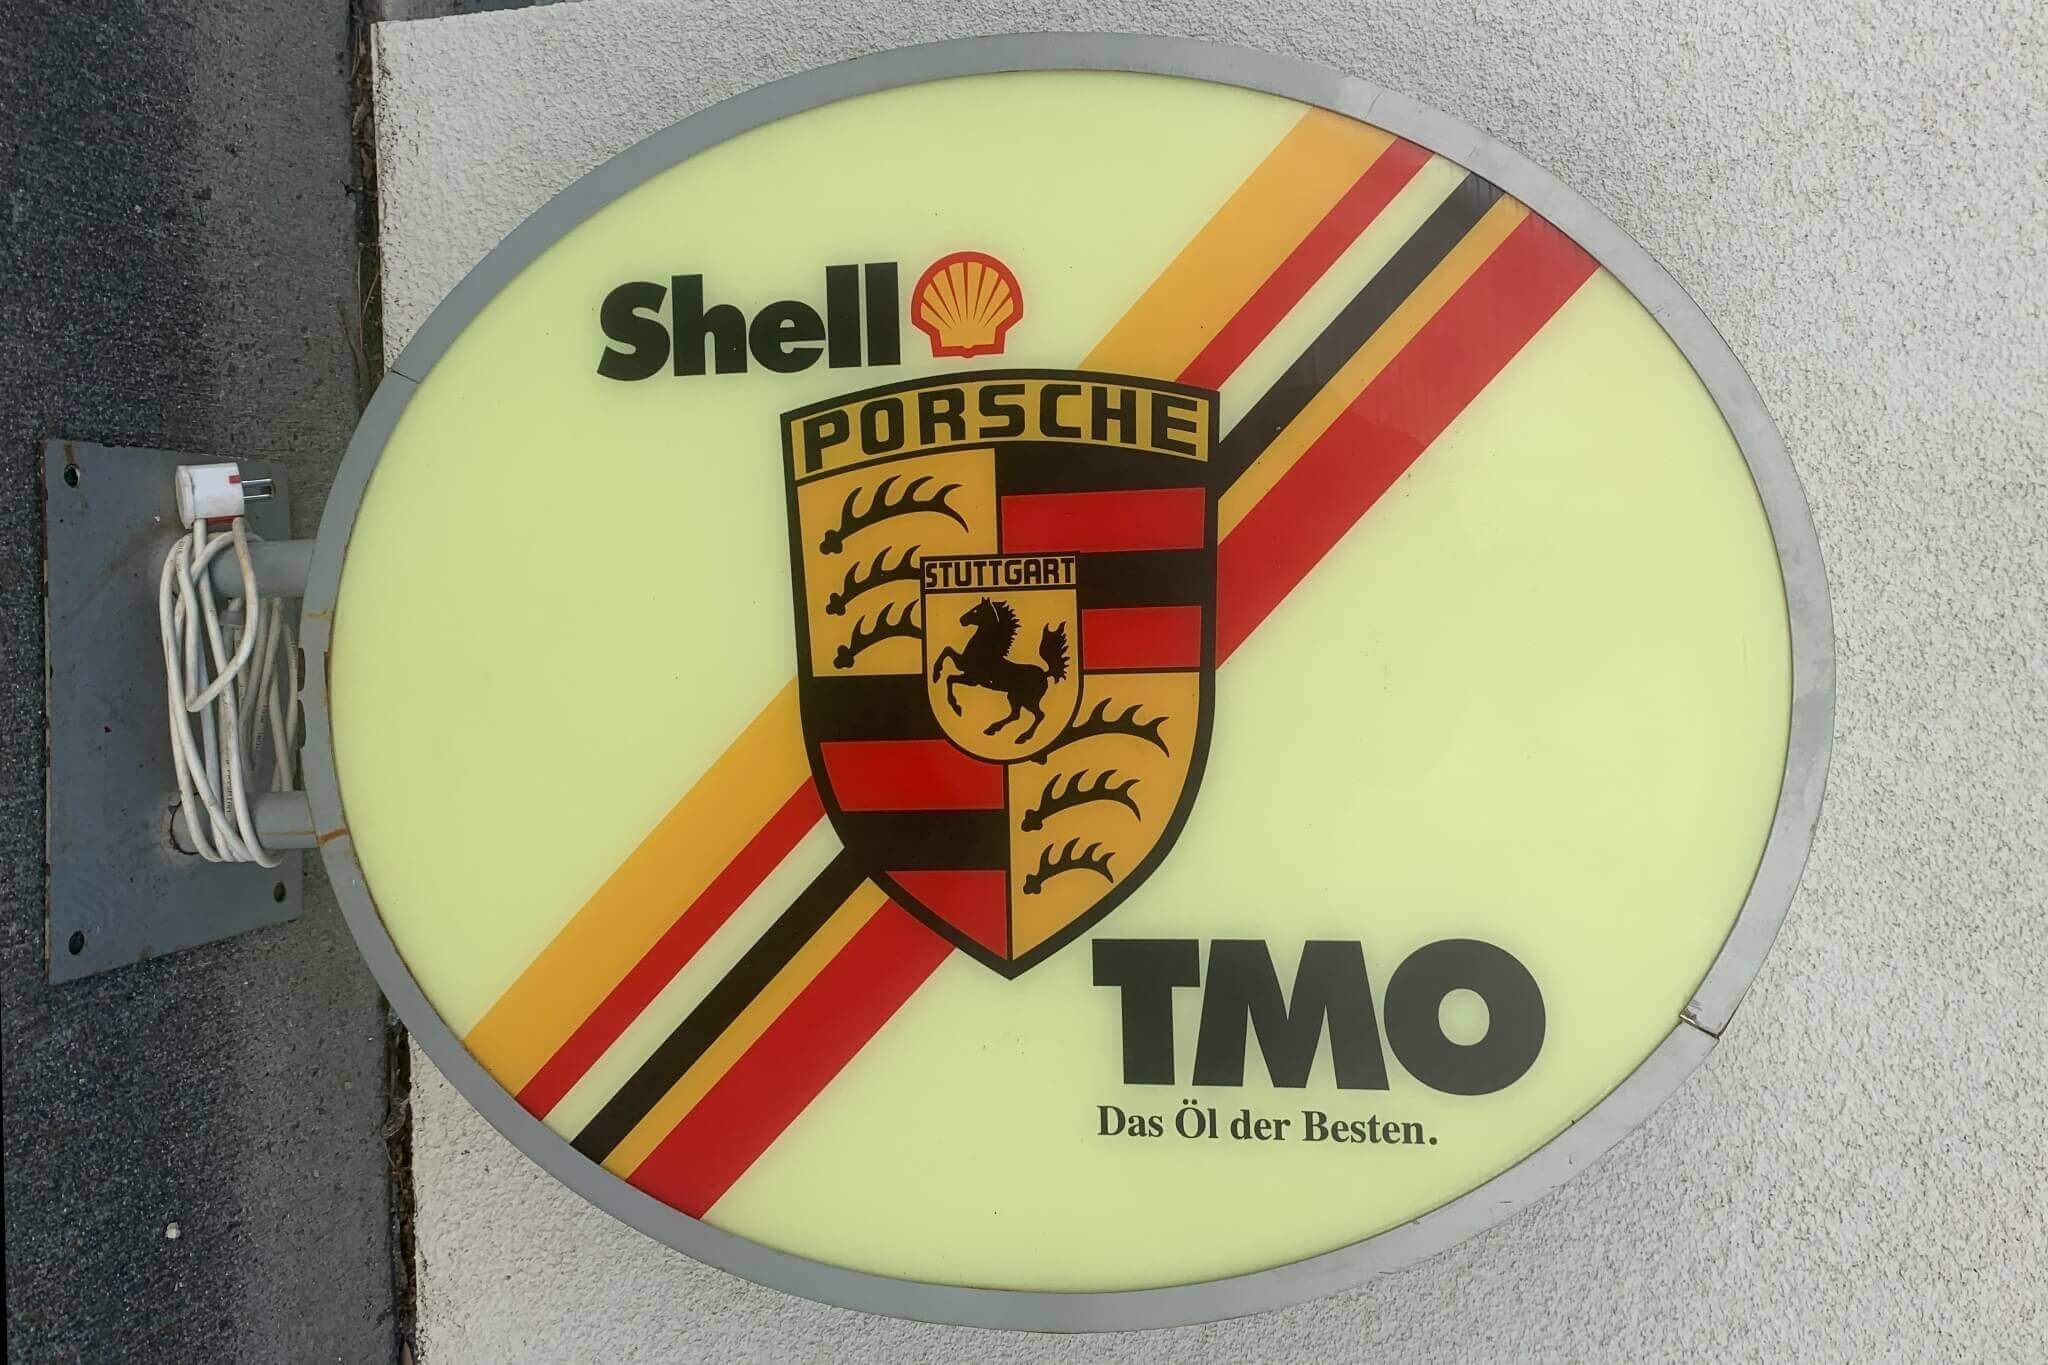 DT: Authentic Double-Sided Illuminated Porsche Shell TMO Dealership Sign